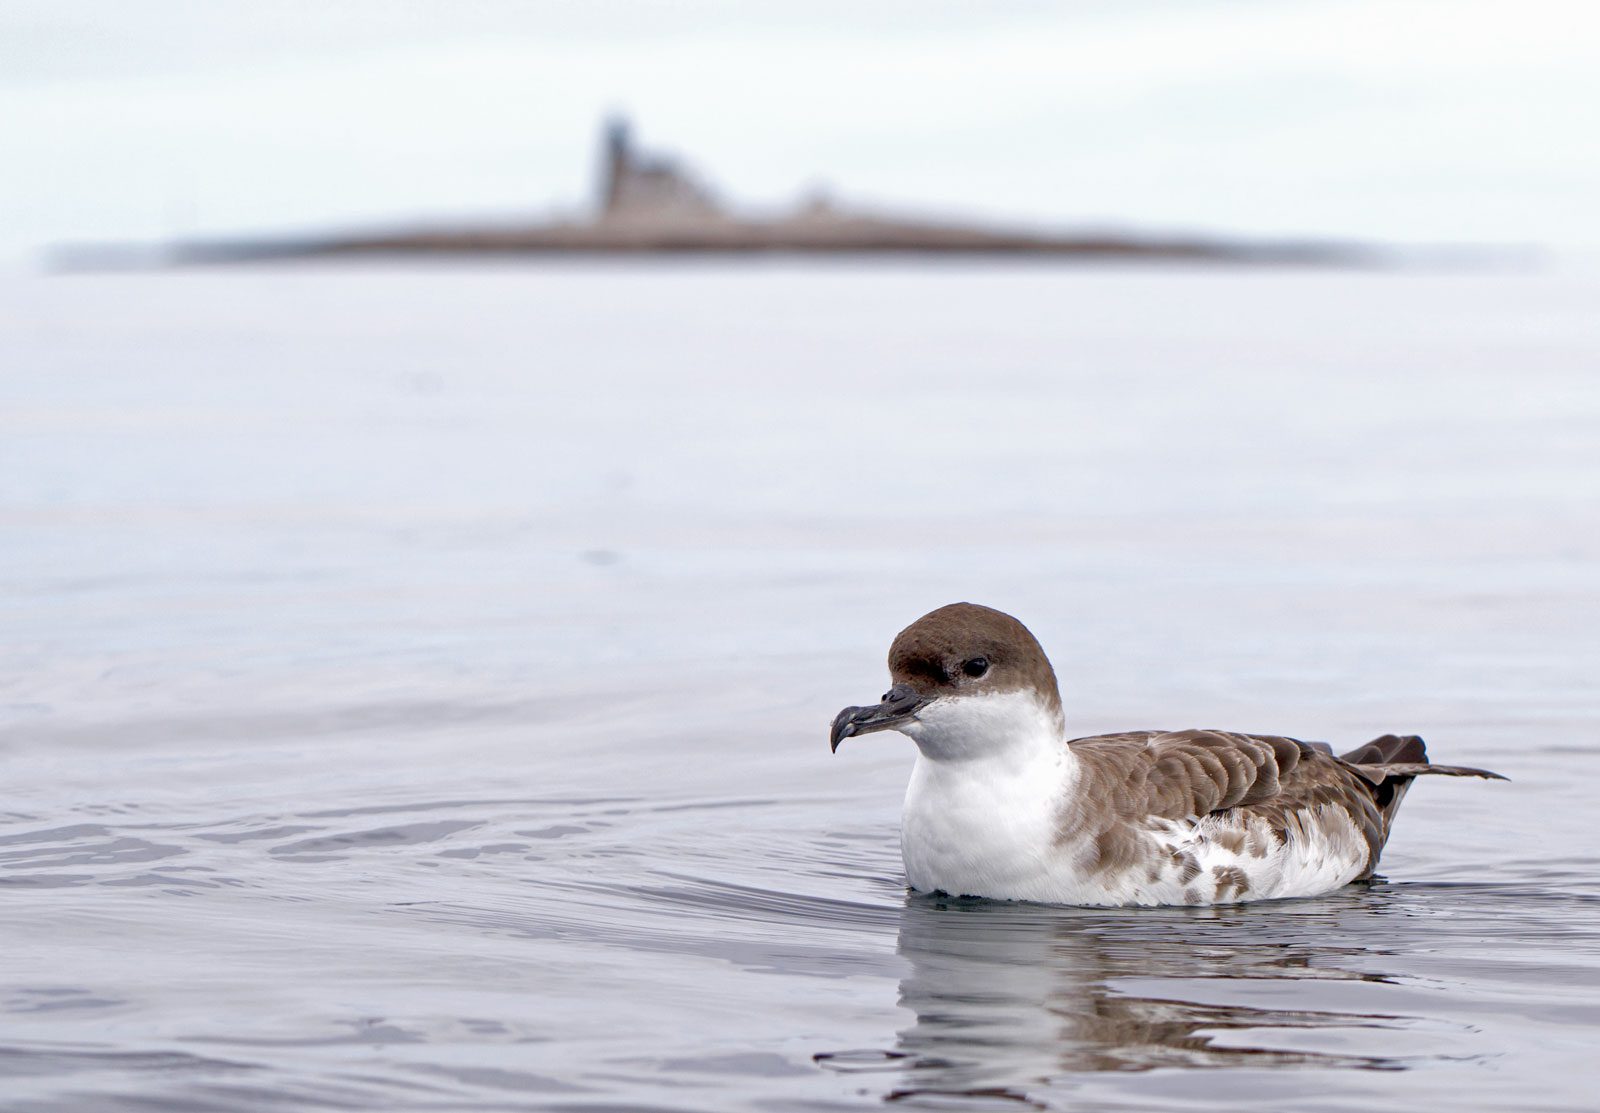 brown and white seabird sits on a calm ocean with an island in the background